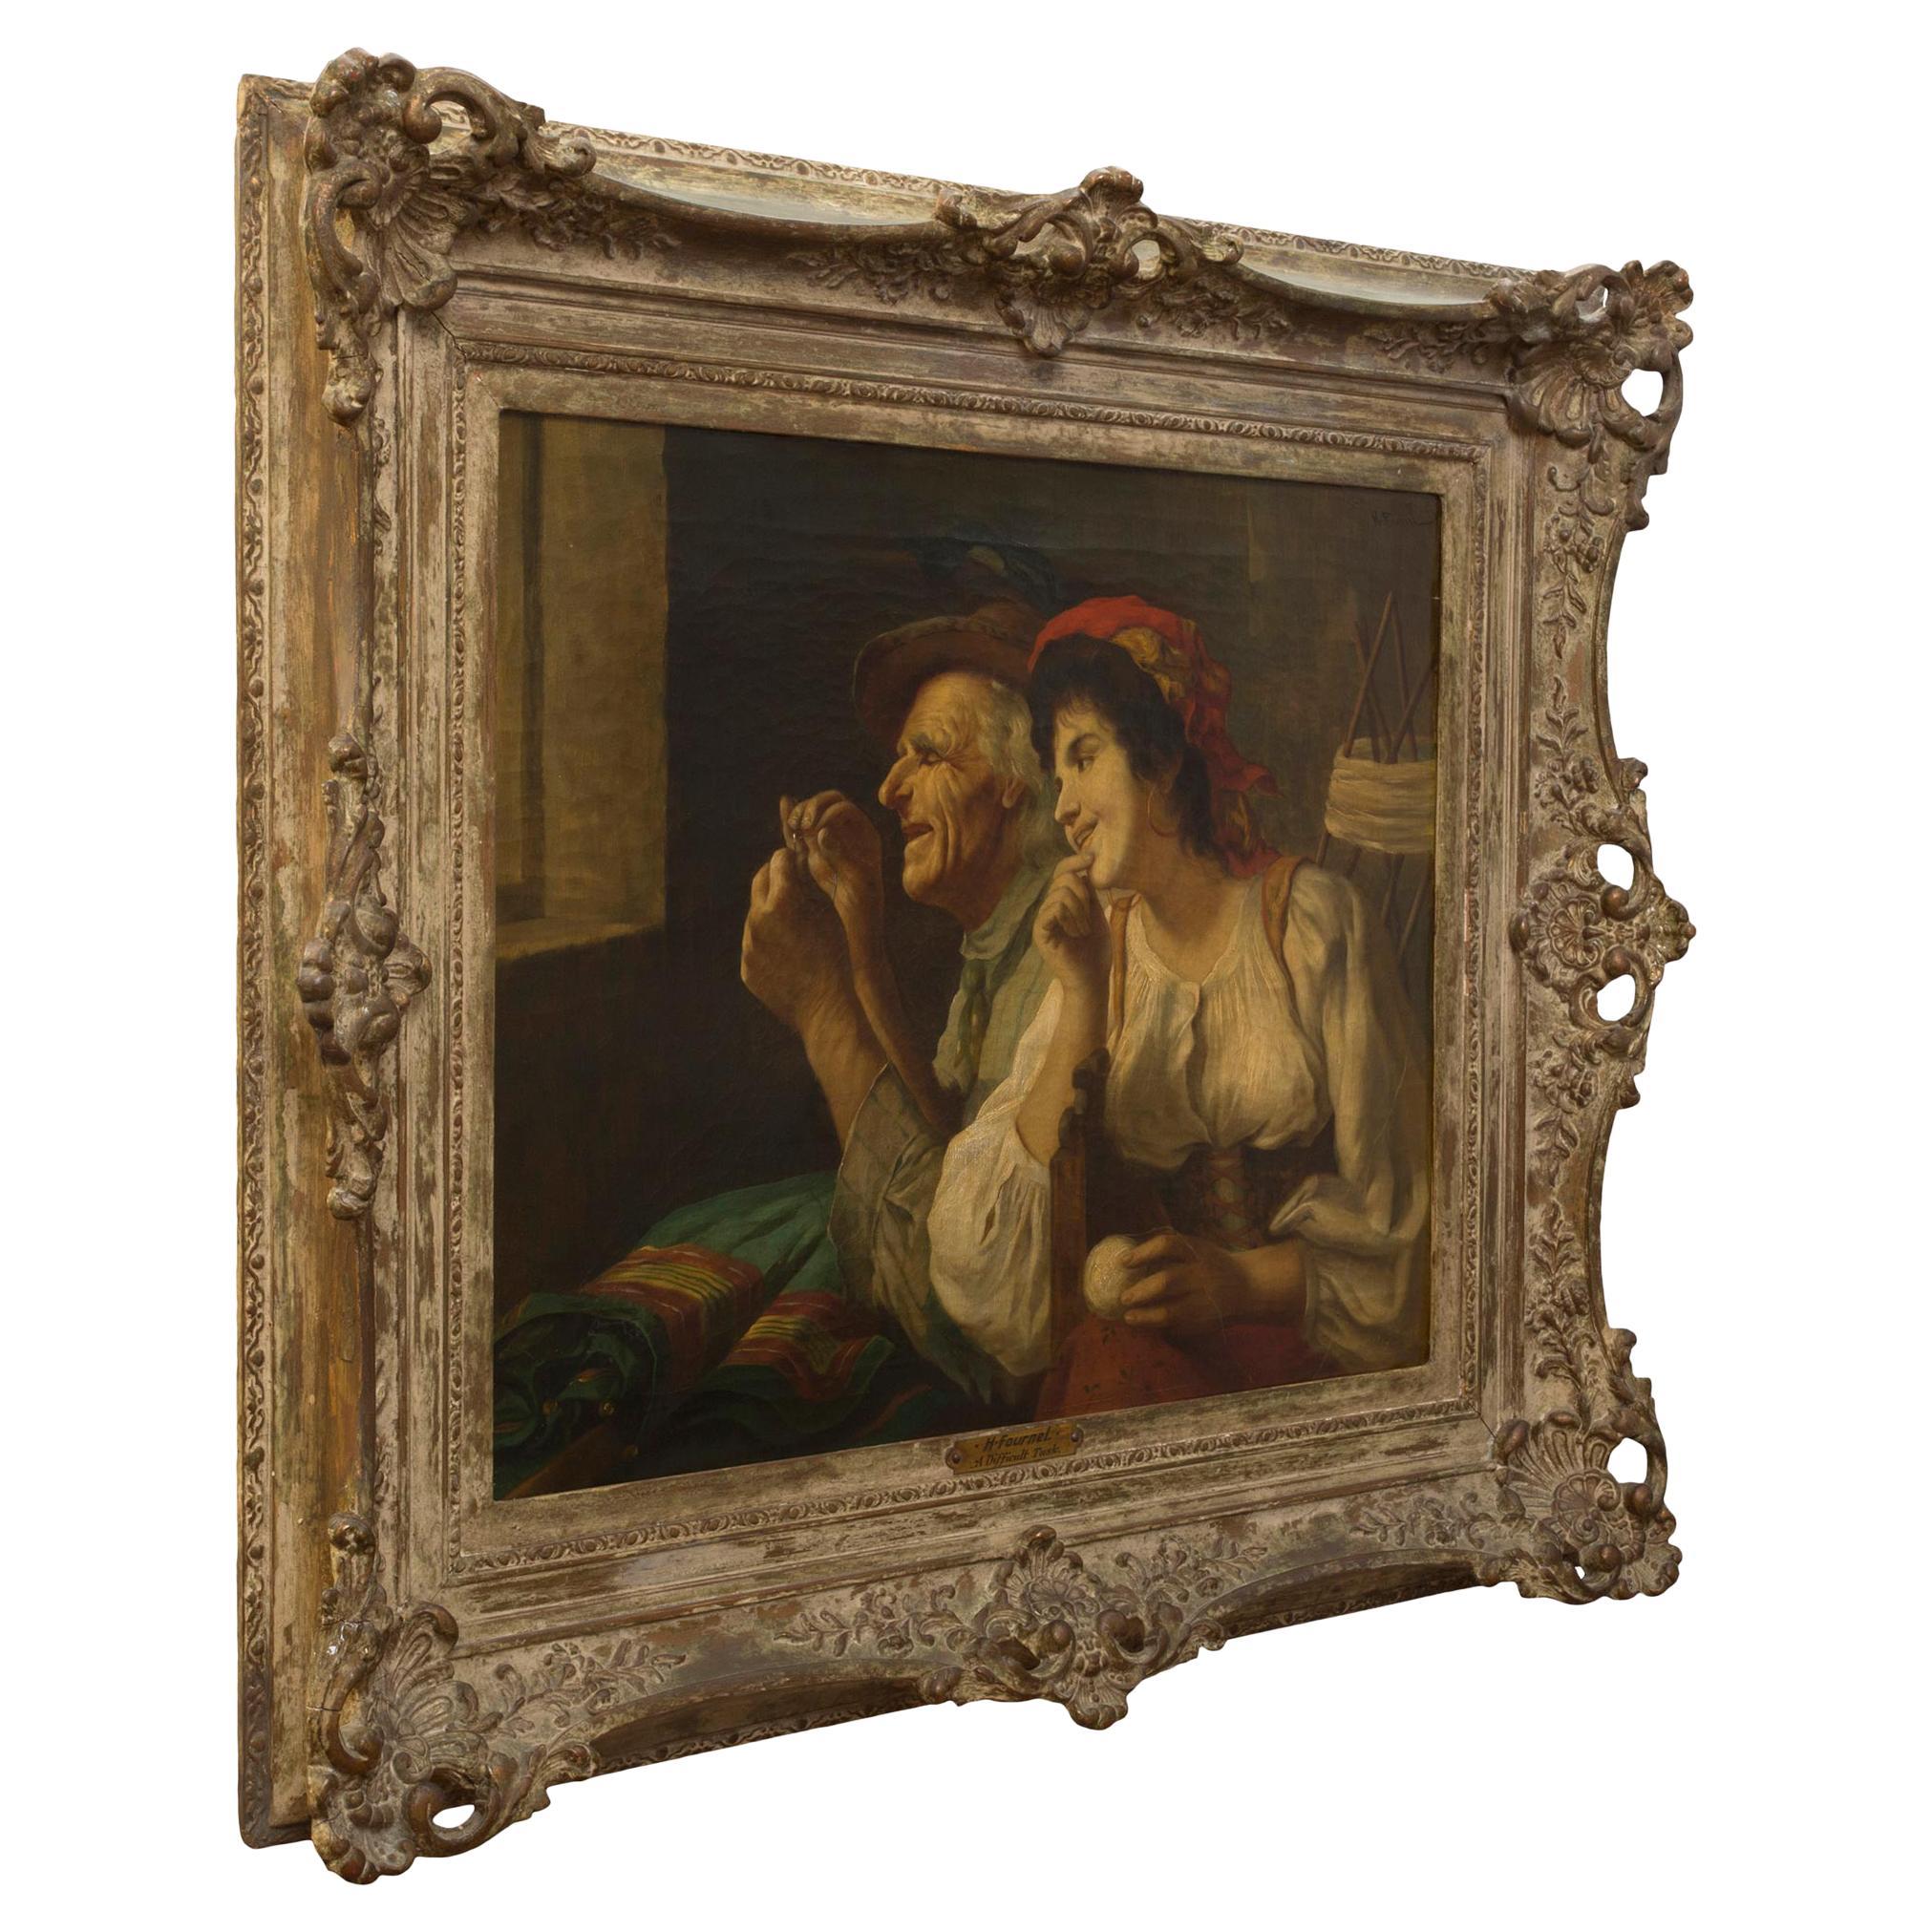 A charming European 19th century oil on canvas titled 